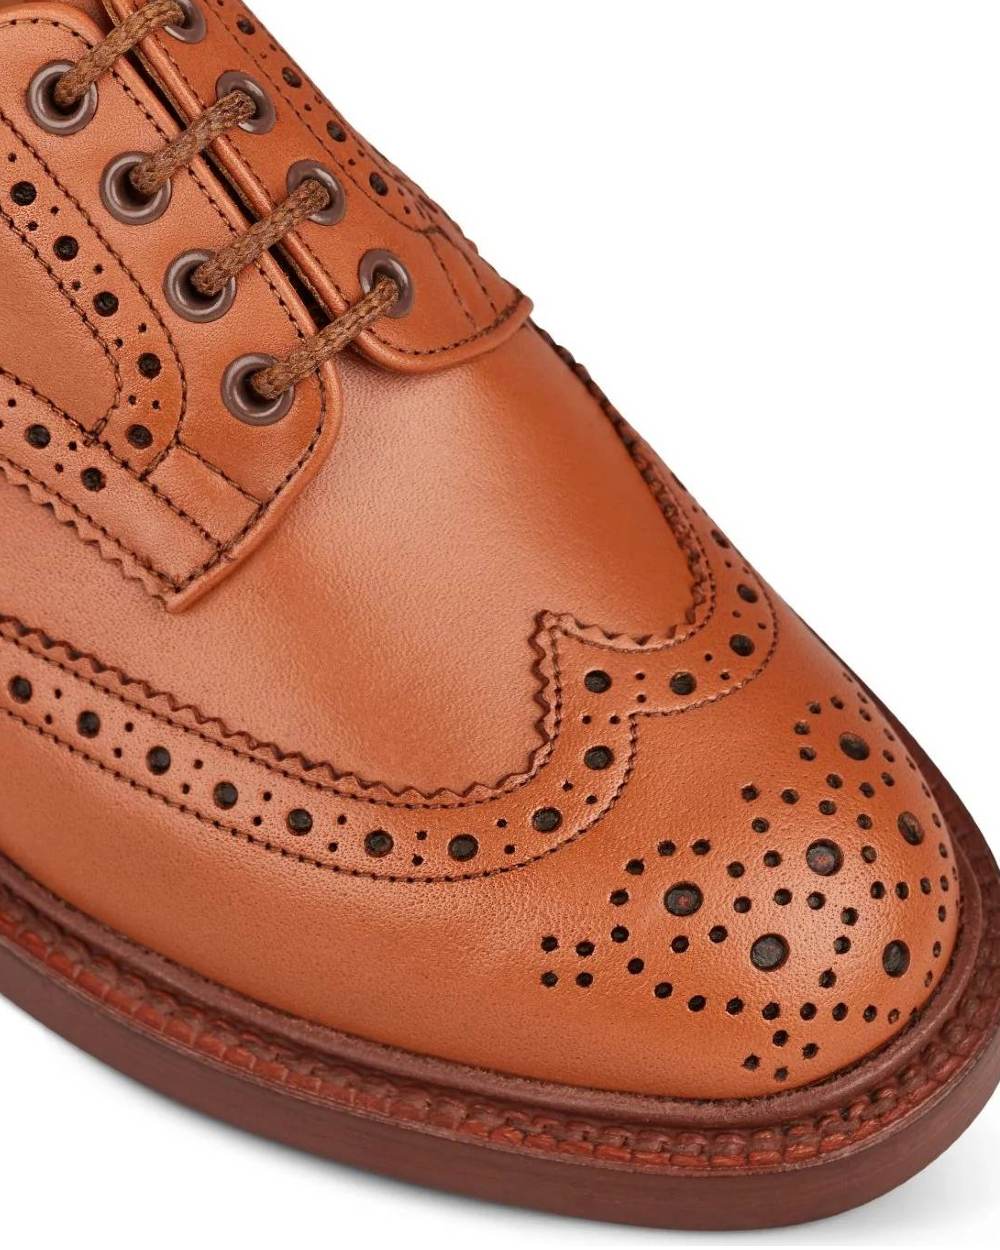 Tan Coloured Trickers Bourton Country Shoe On A White Background 